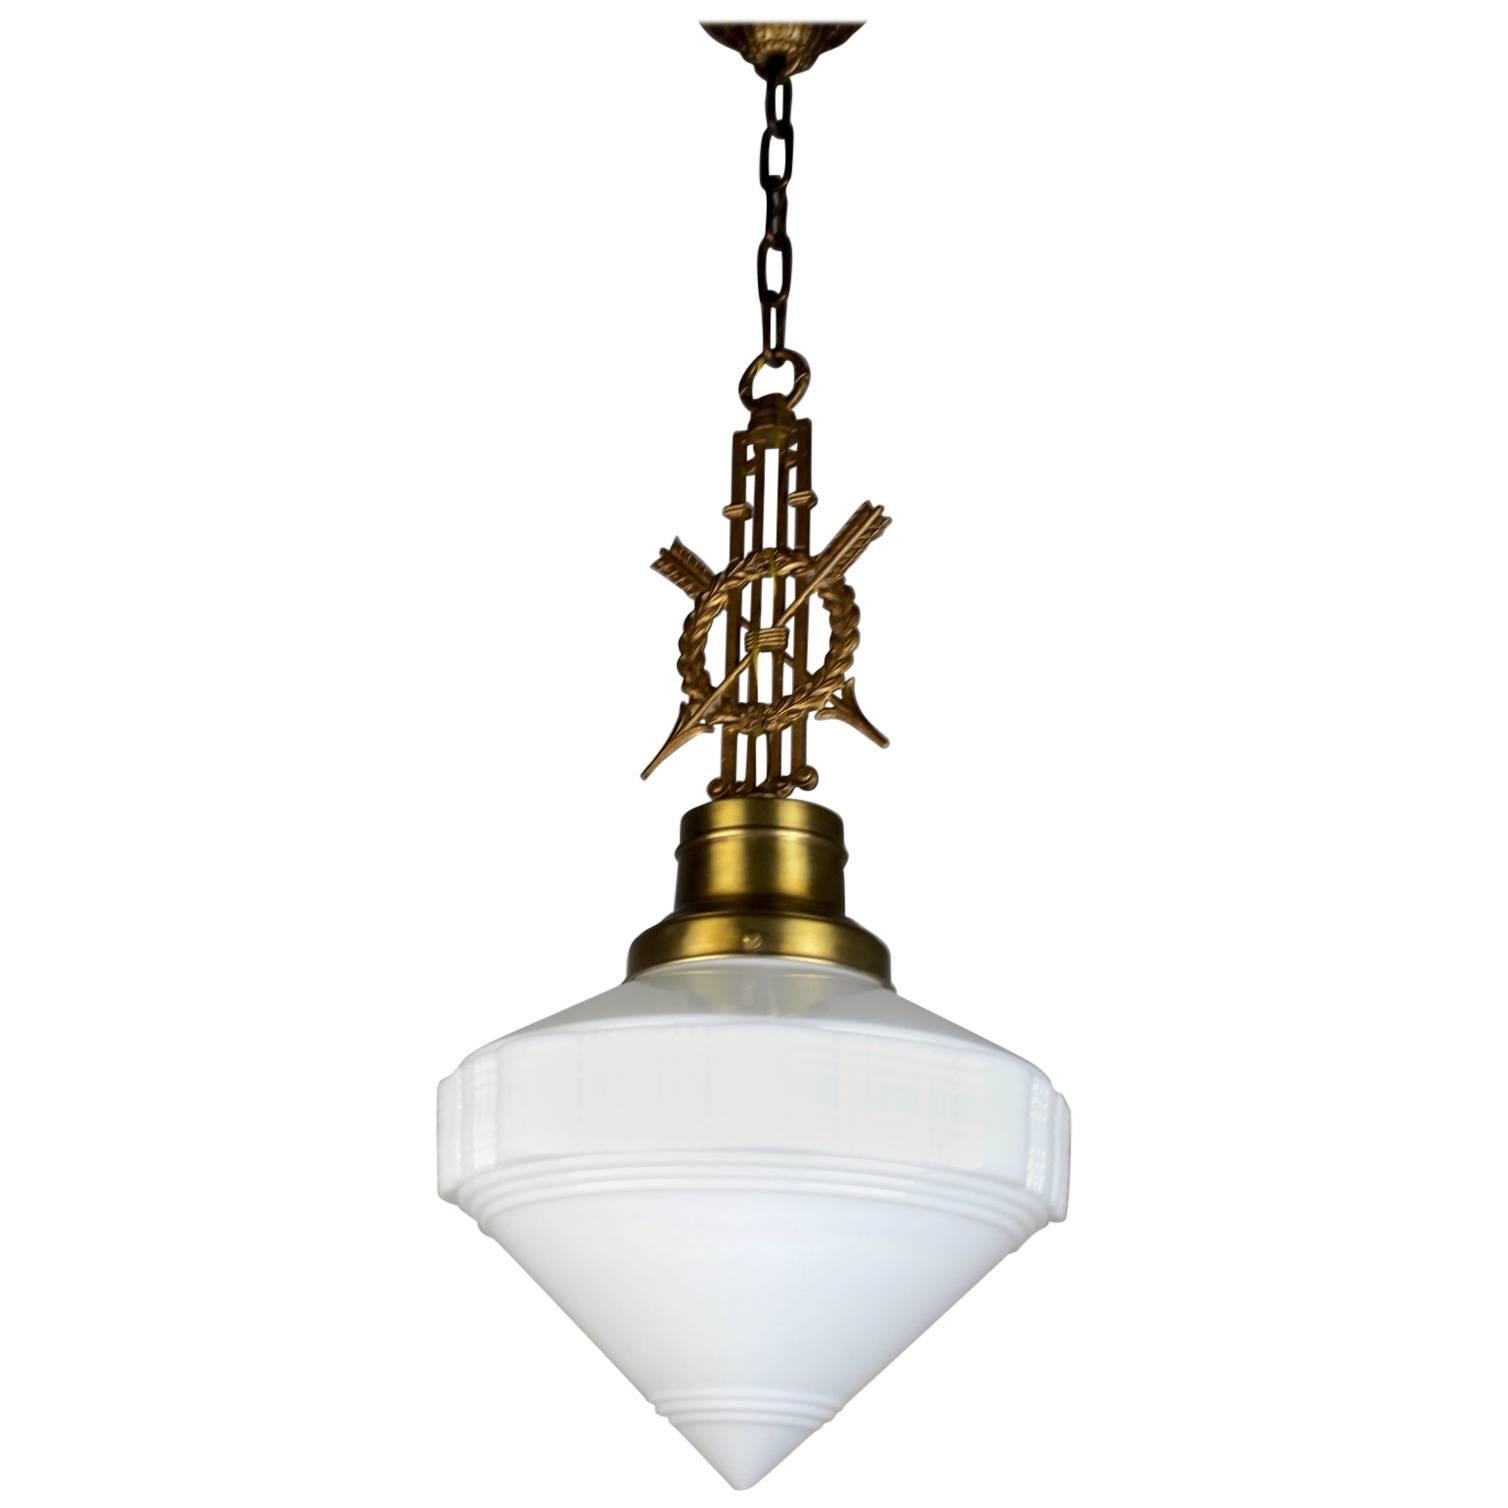 Pendant Fixture with Crossed Arrows Motif For Sale